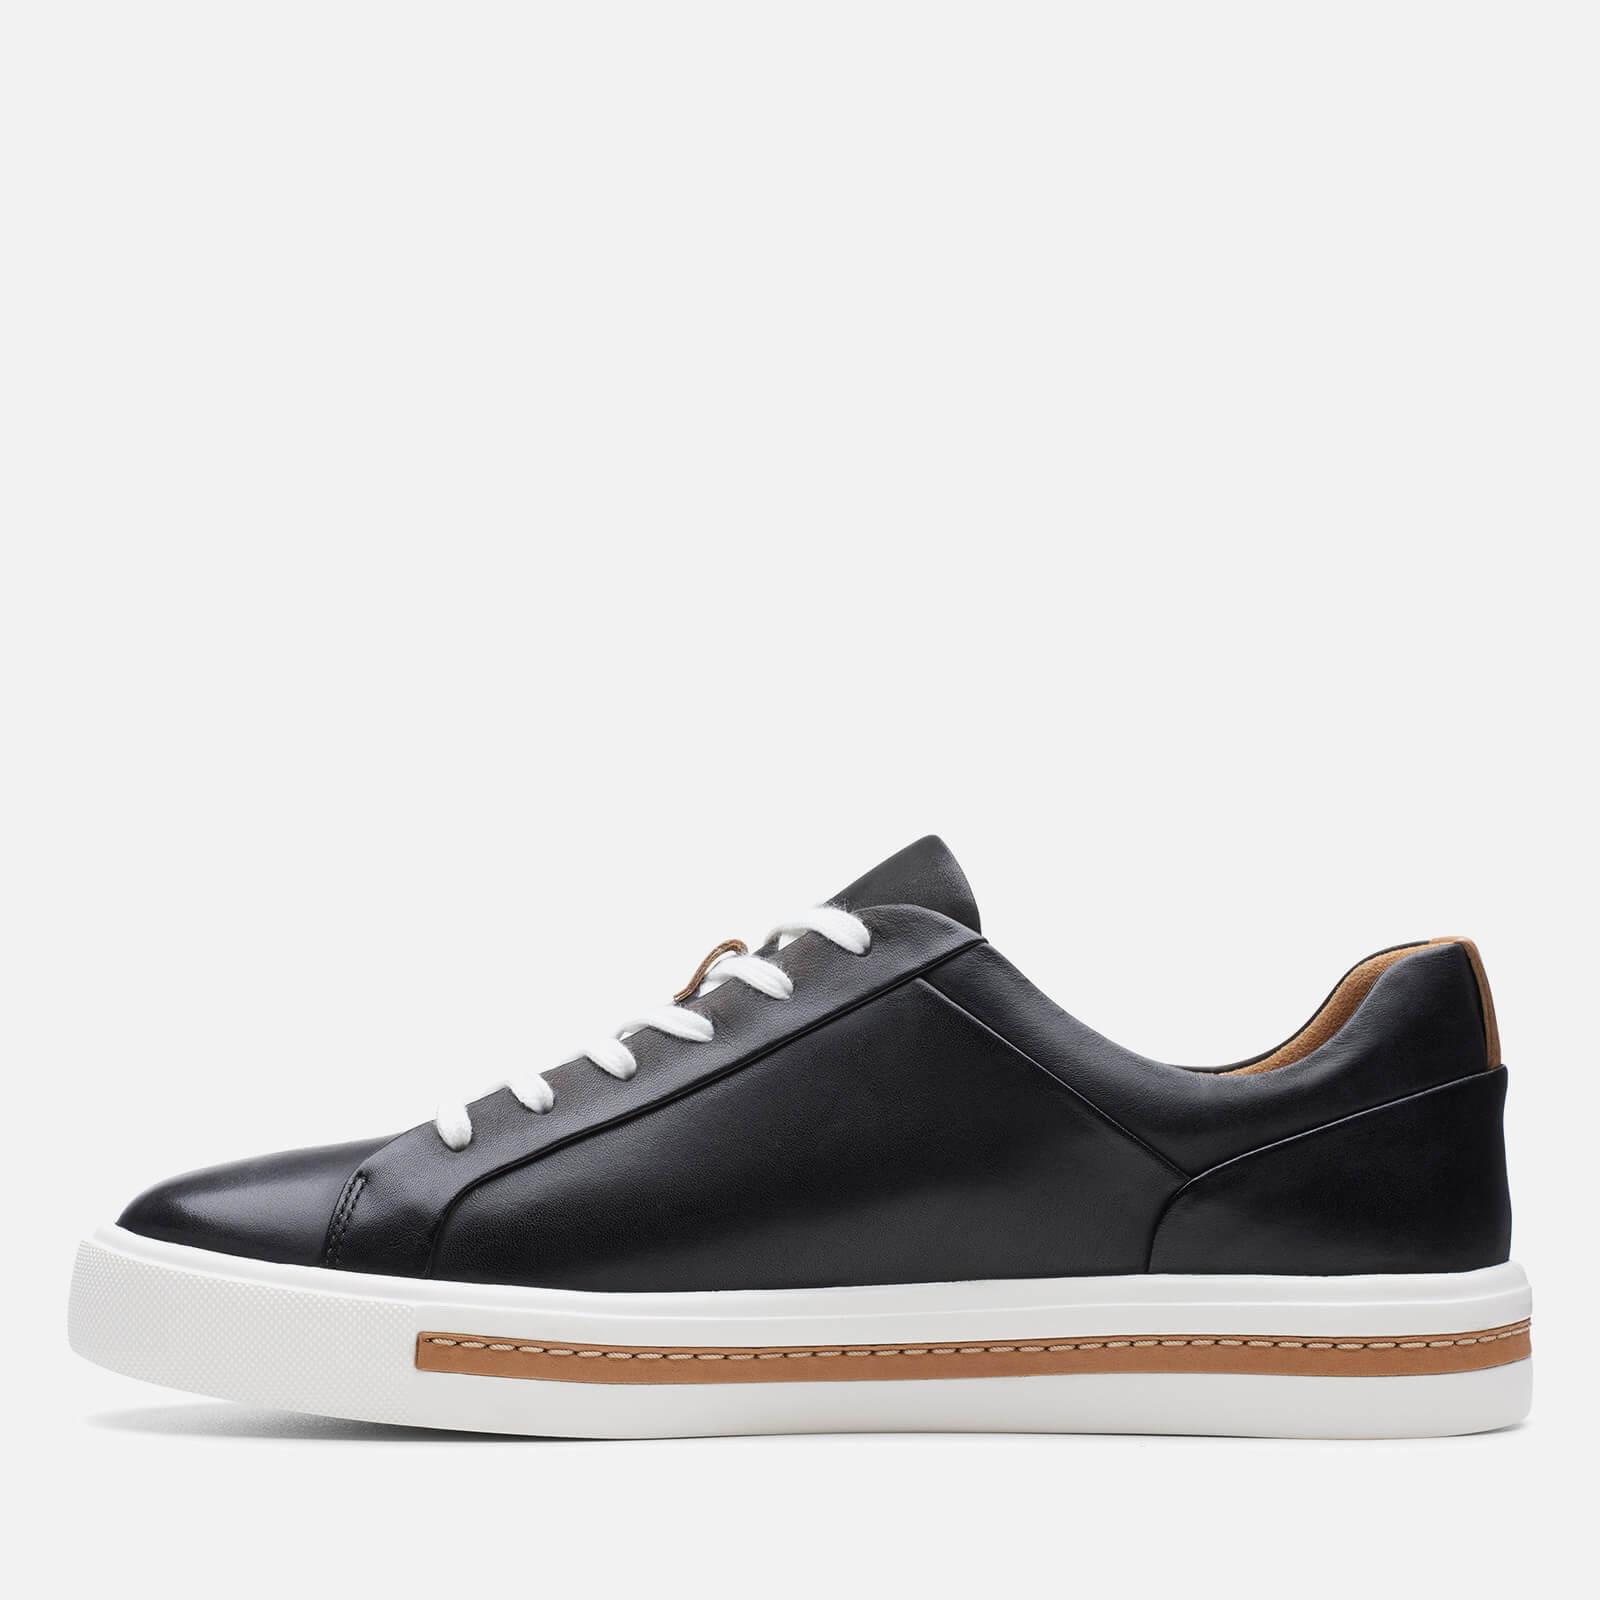 Clarks Un Maui Leather Trainers in Black | Lyst